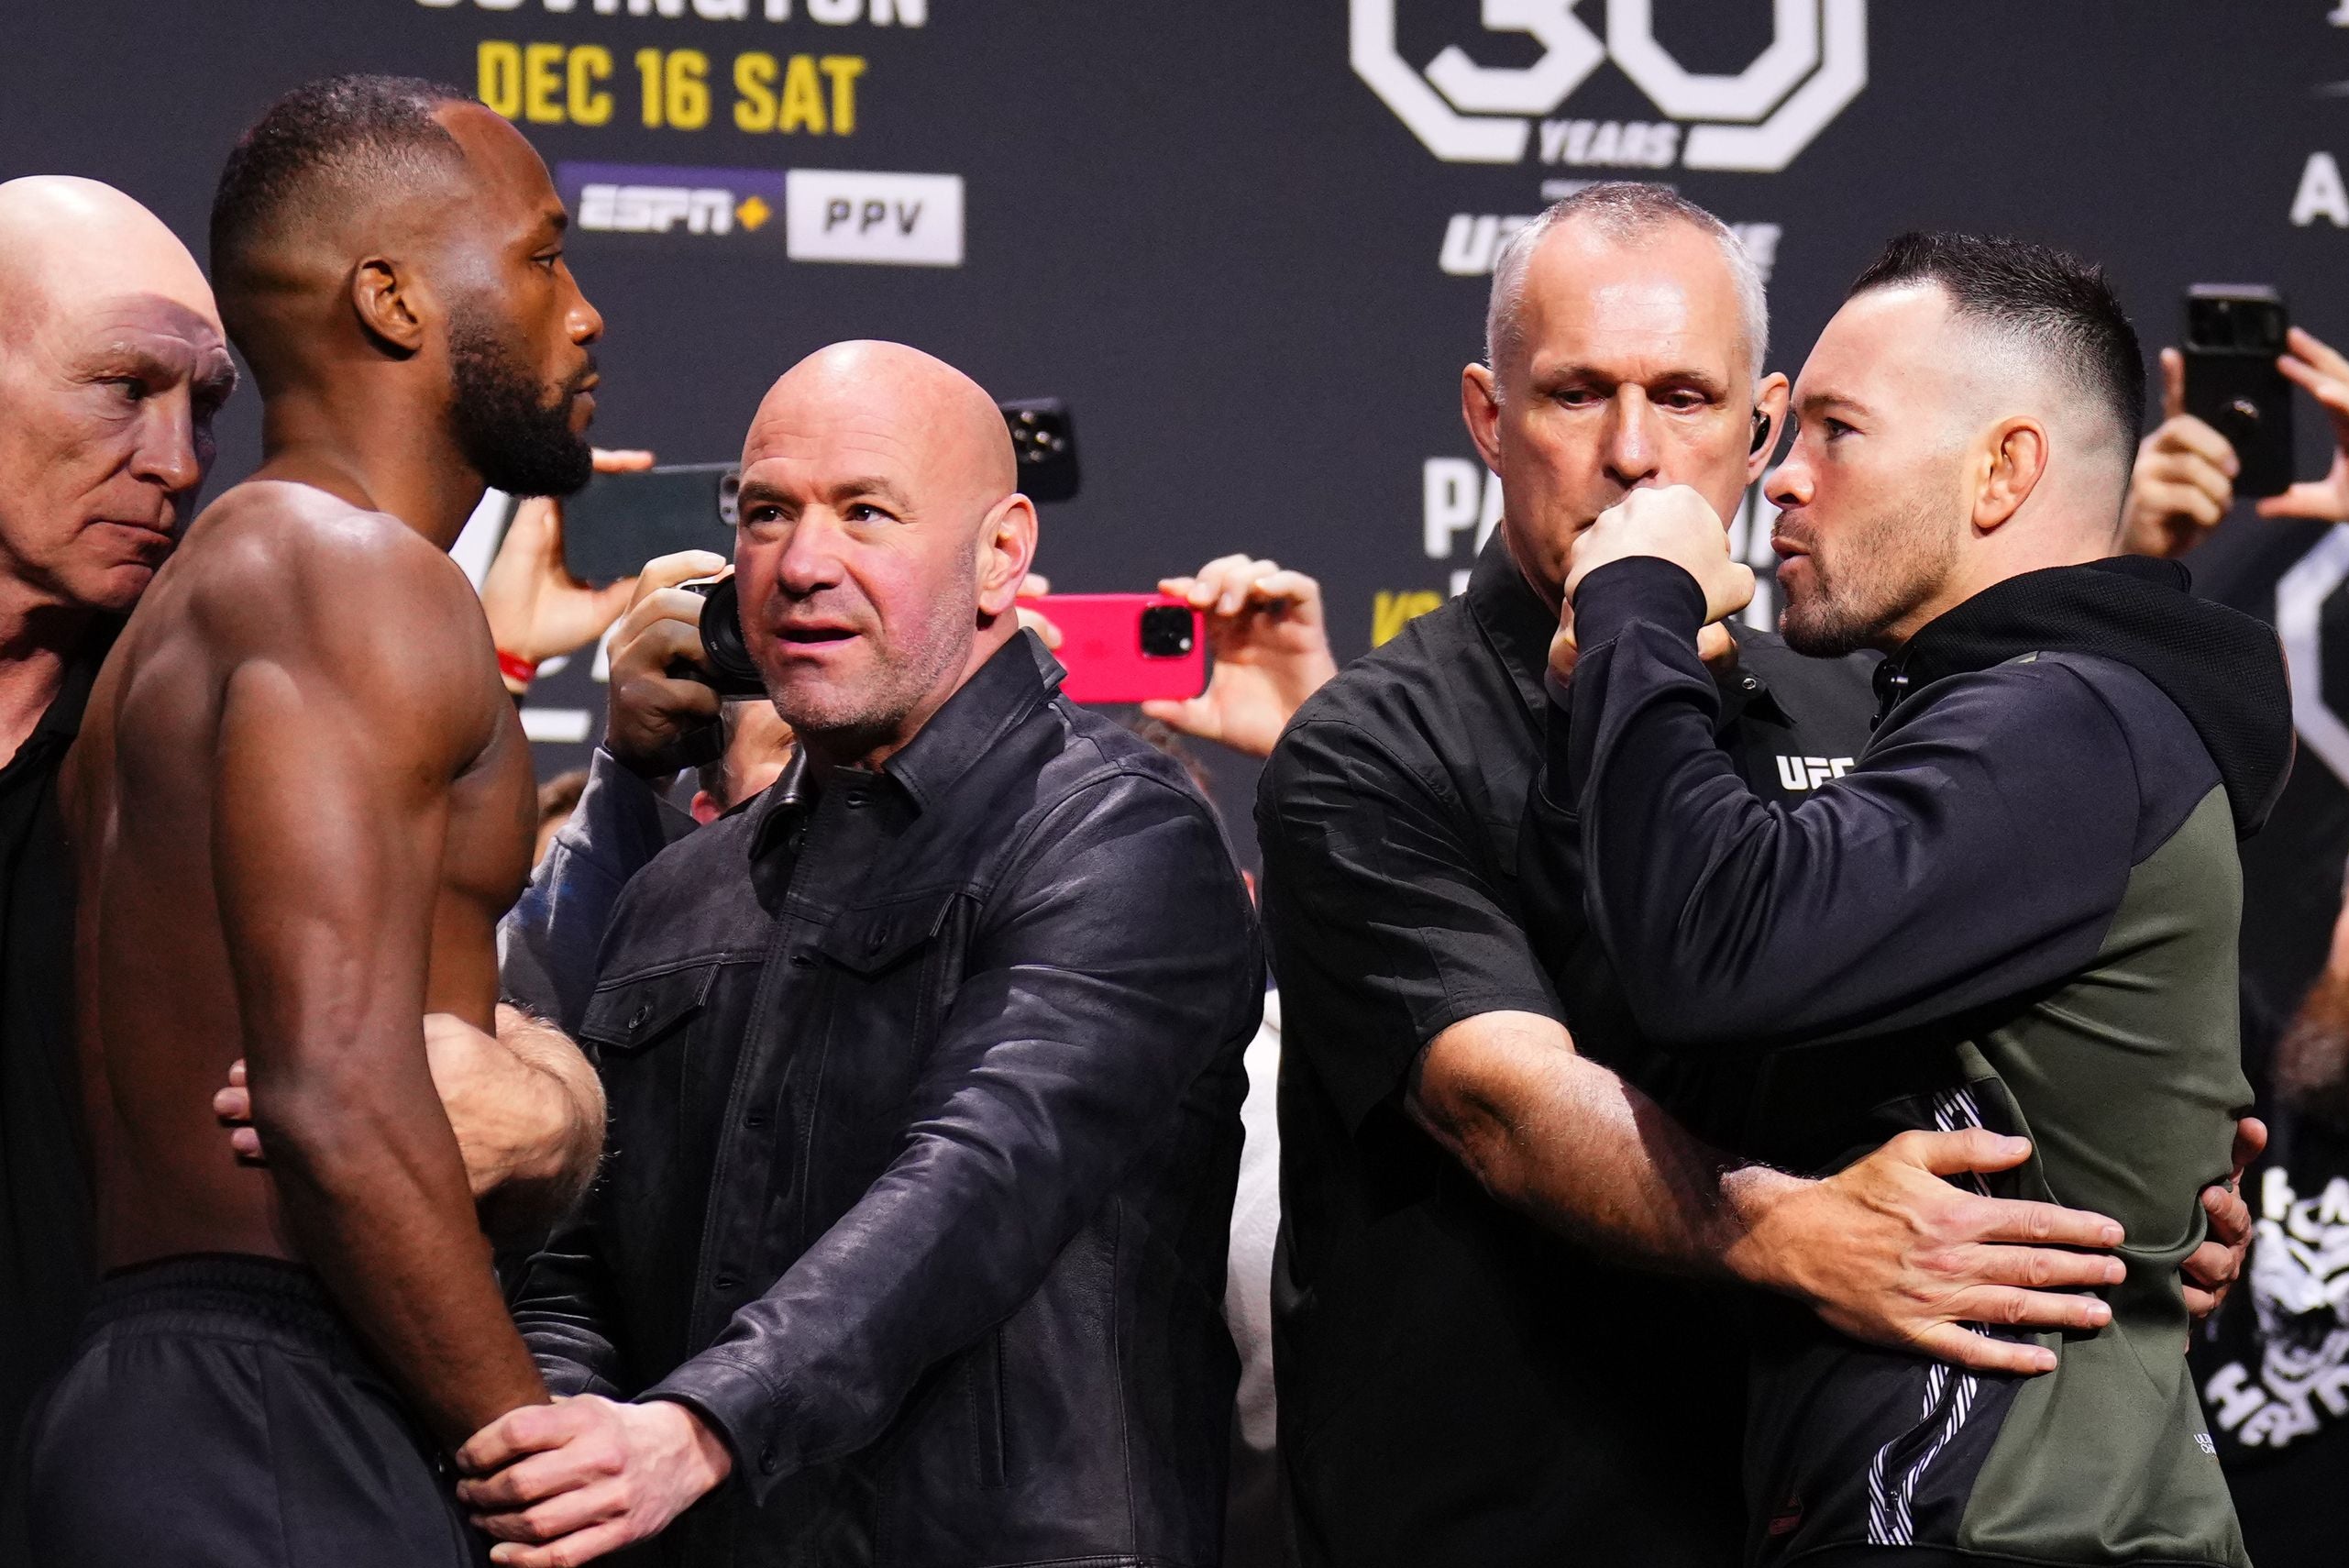 Leon Edwards (left) defends the welterweight title against Colby Covington